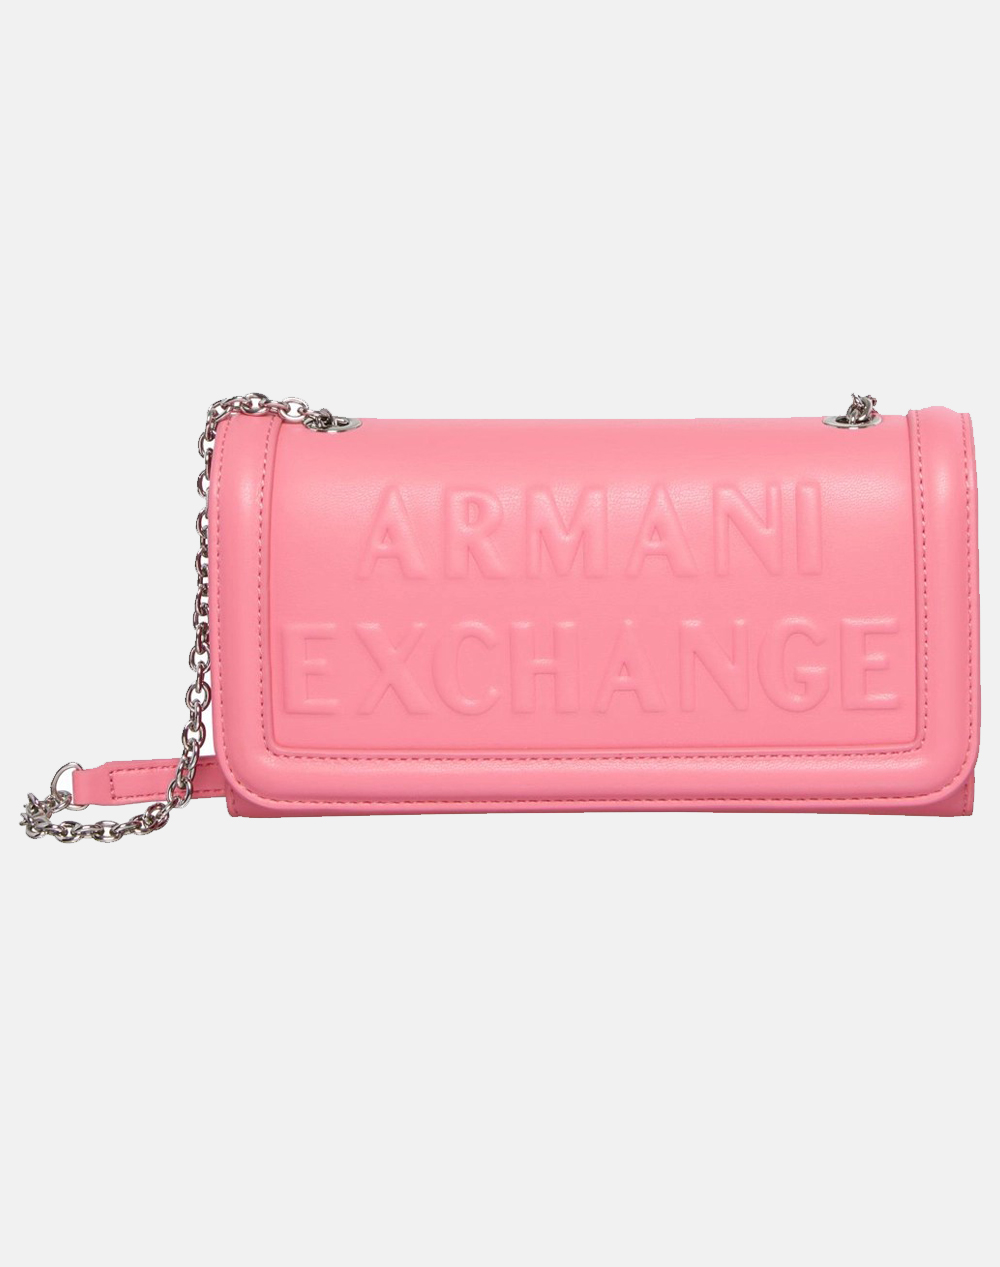 ARMANI EXCHANGE WOMAN”S WALLET ON CH (Διαστάσεις: 19 x 10 x 3.5 εκ) 9485654R729-09677 Pink 3810AARME6300015_XR27827